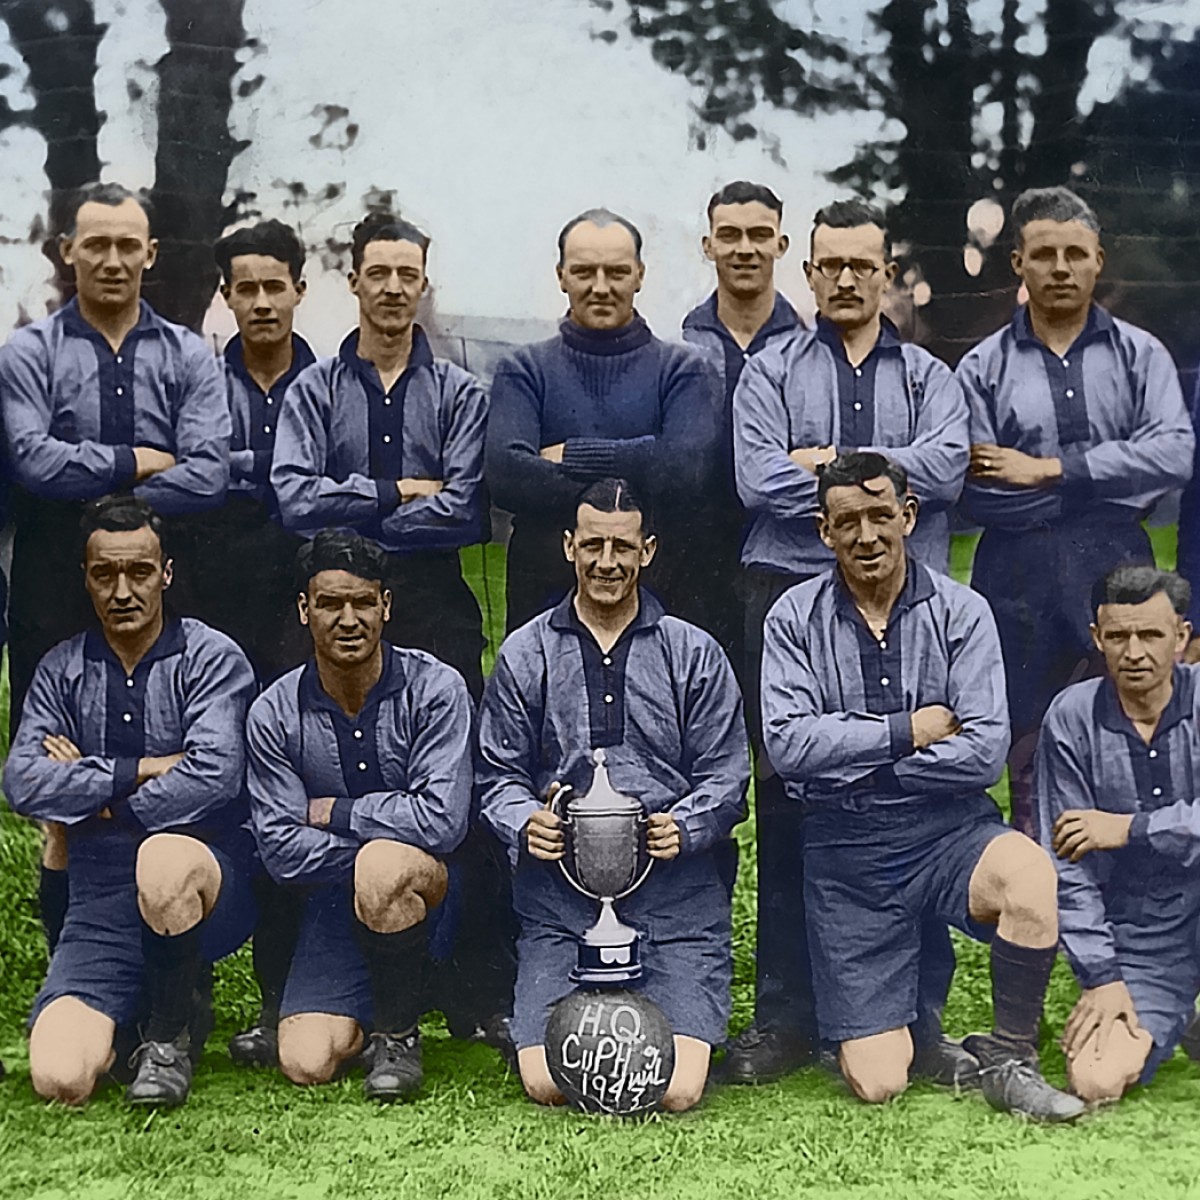 1695106291_Image-Restoration-and-colorization_After.jpg